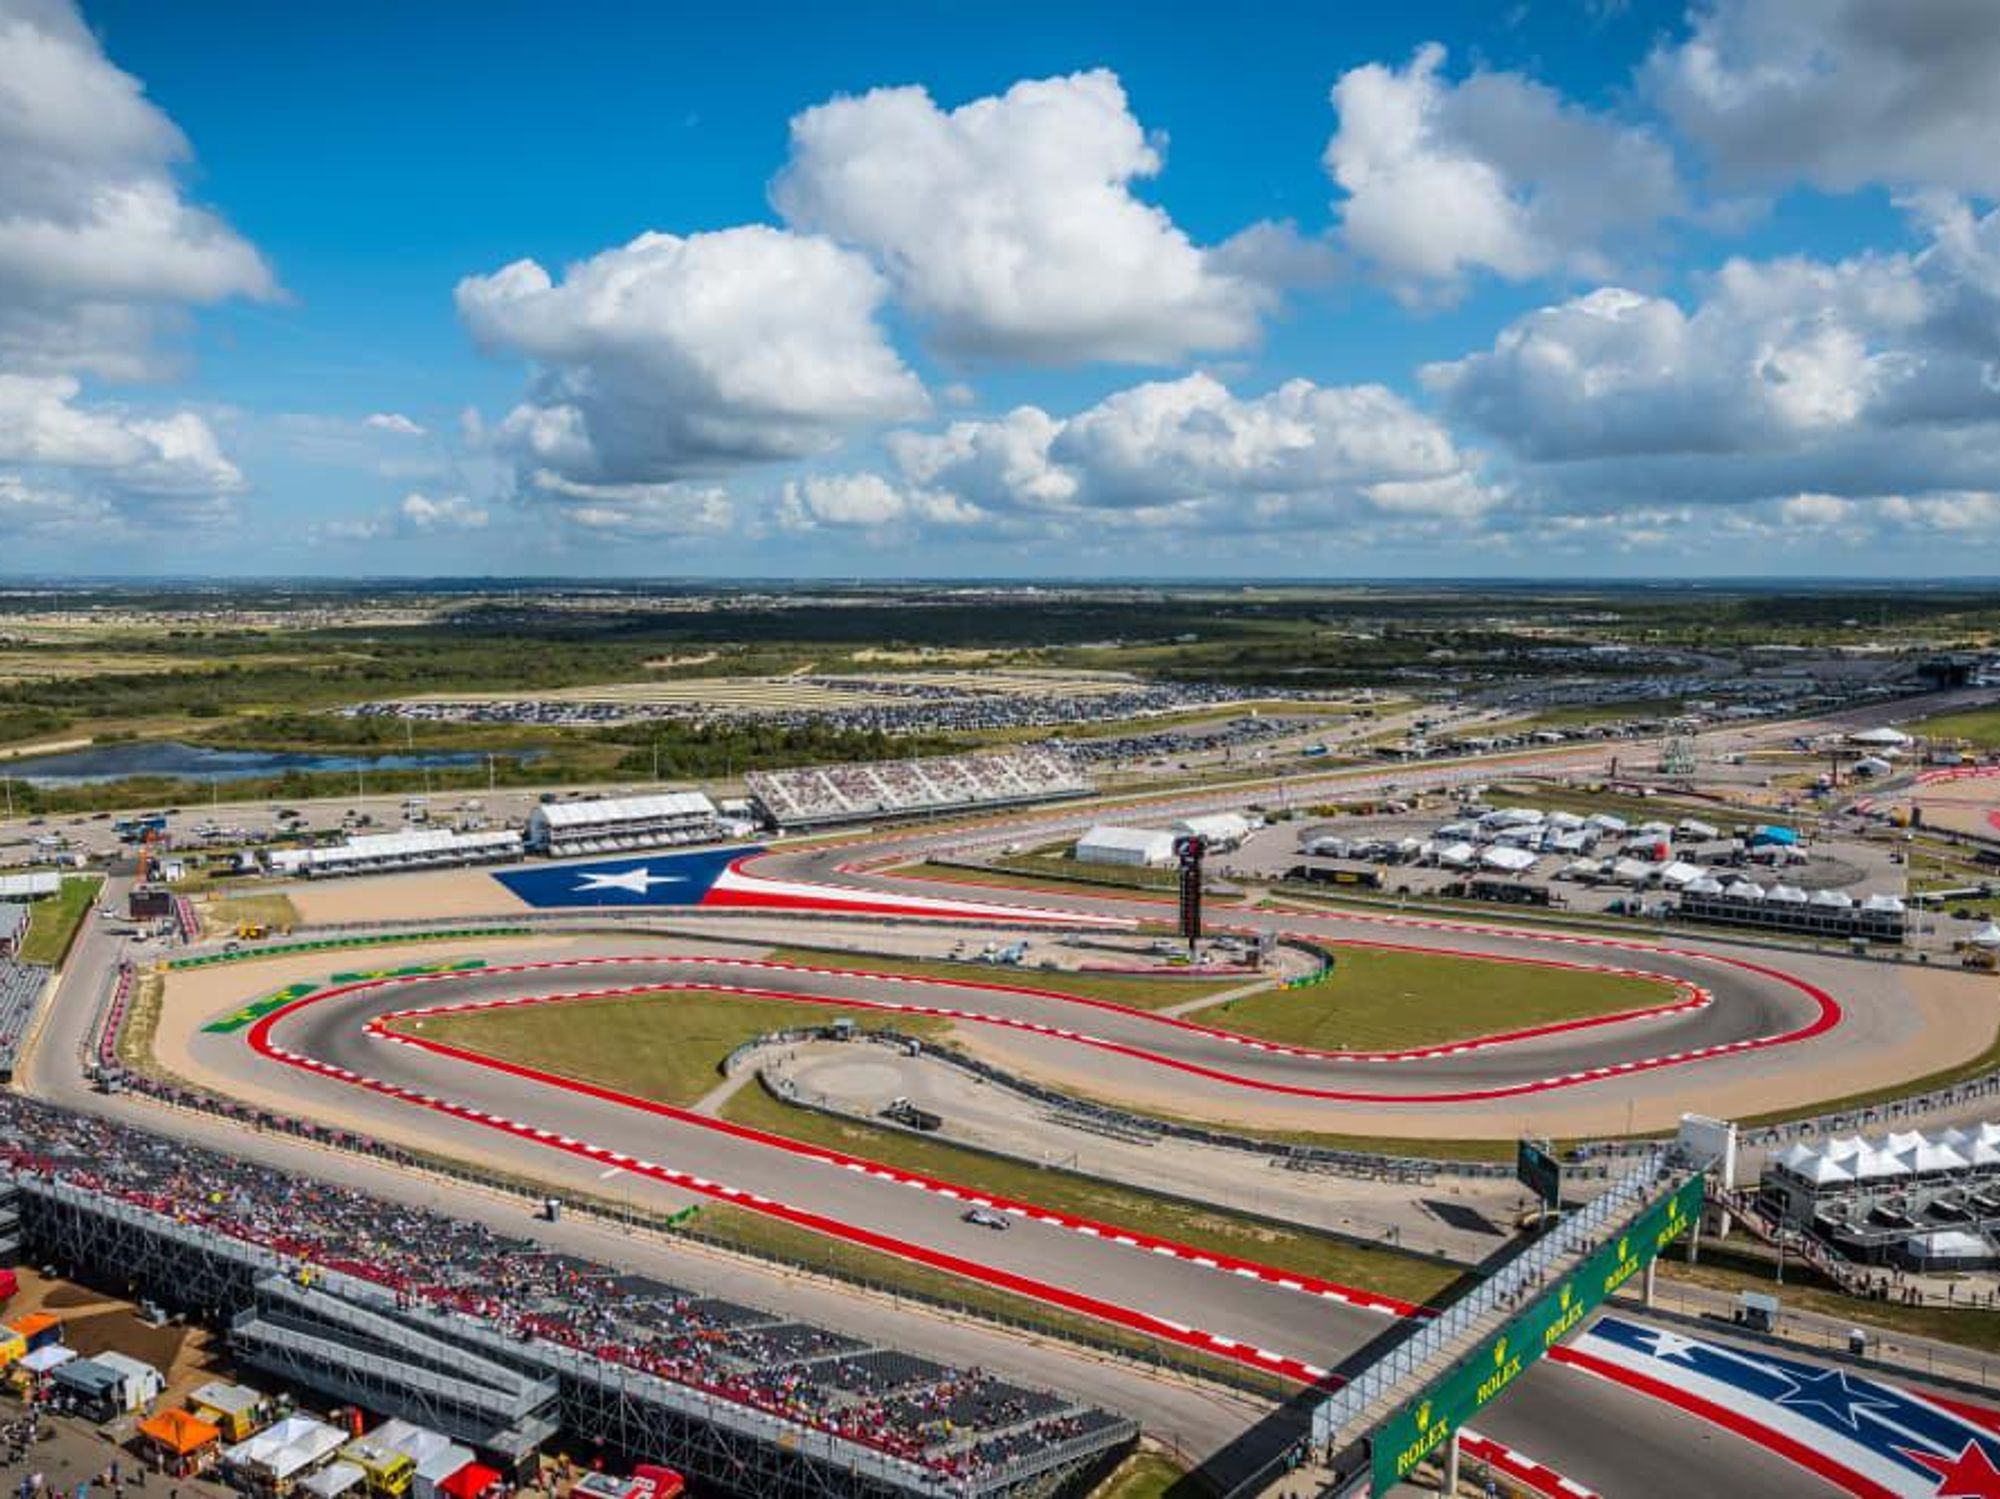 Circuit of the Americas track